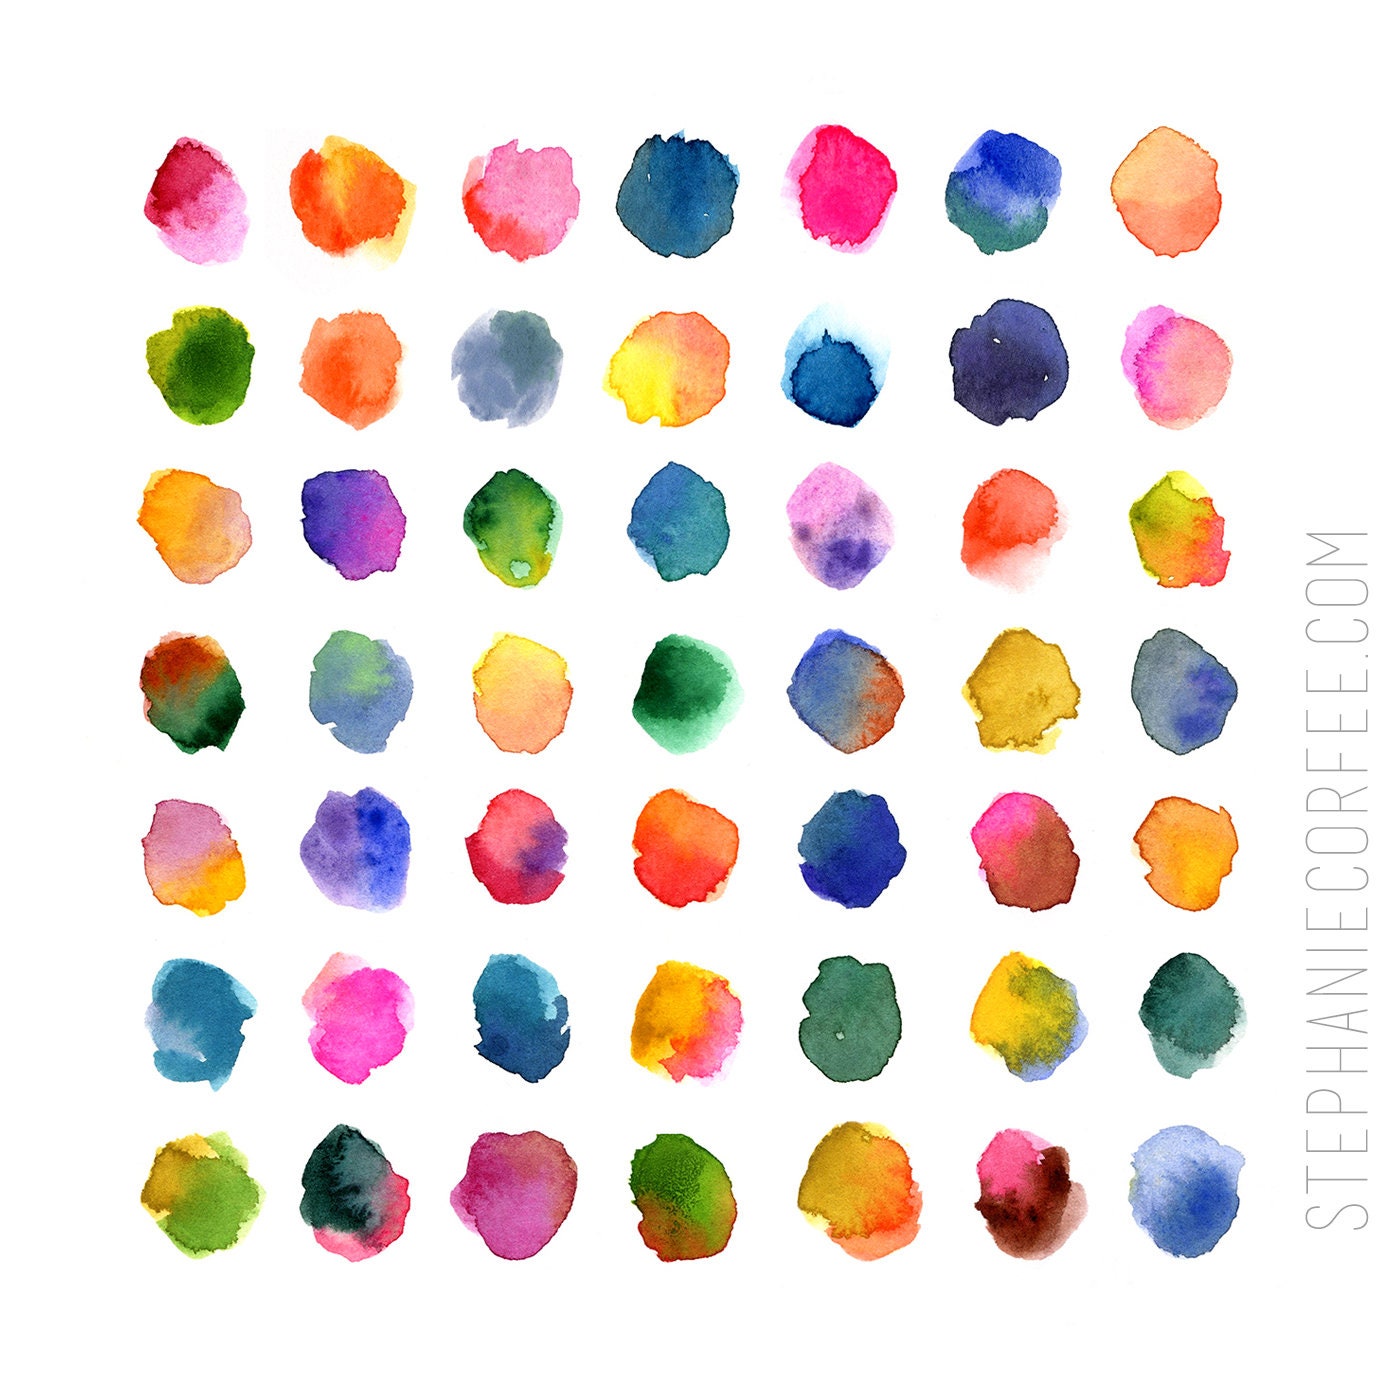 Candy Buttons Rainbow - PRINT colorful print, cheerful print, rainbow print, watercolor, bright, playroom art